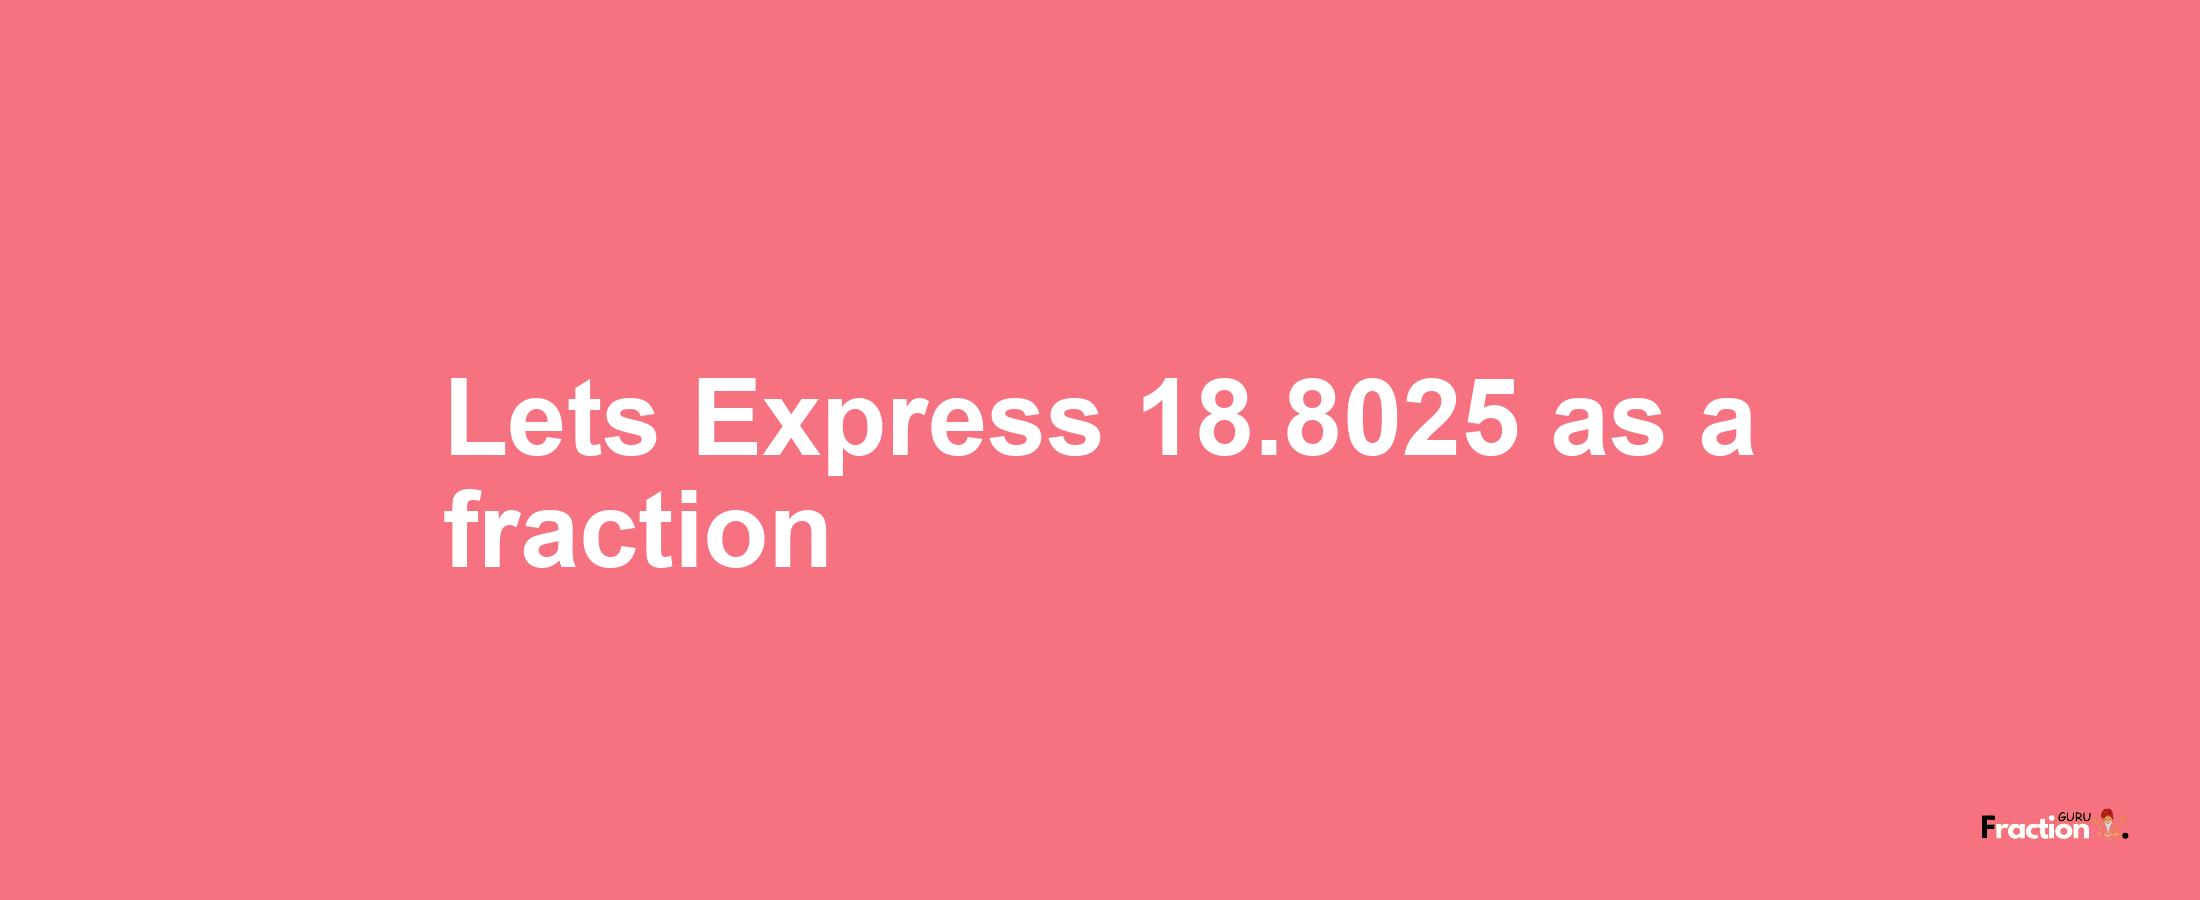 Lets Express 18.8025 as afraction